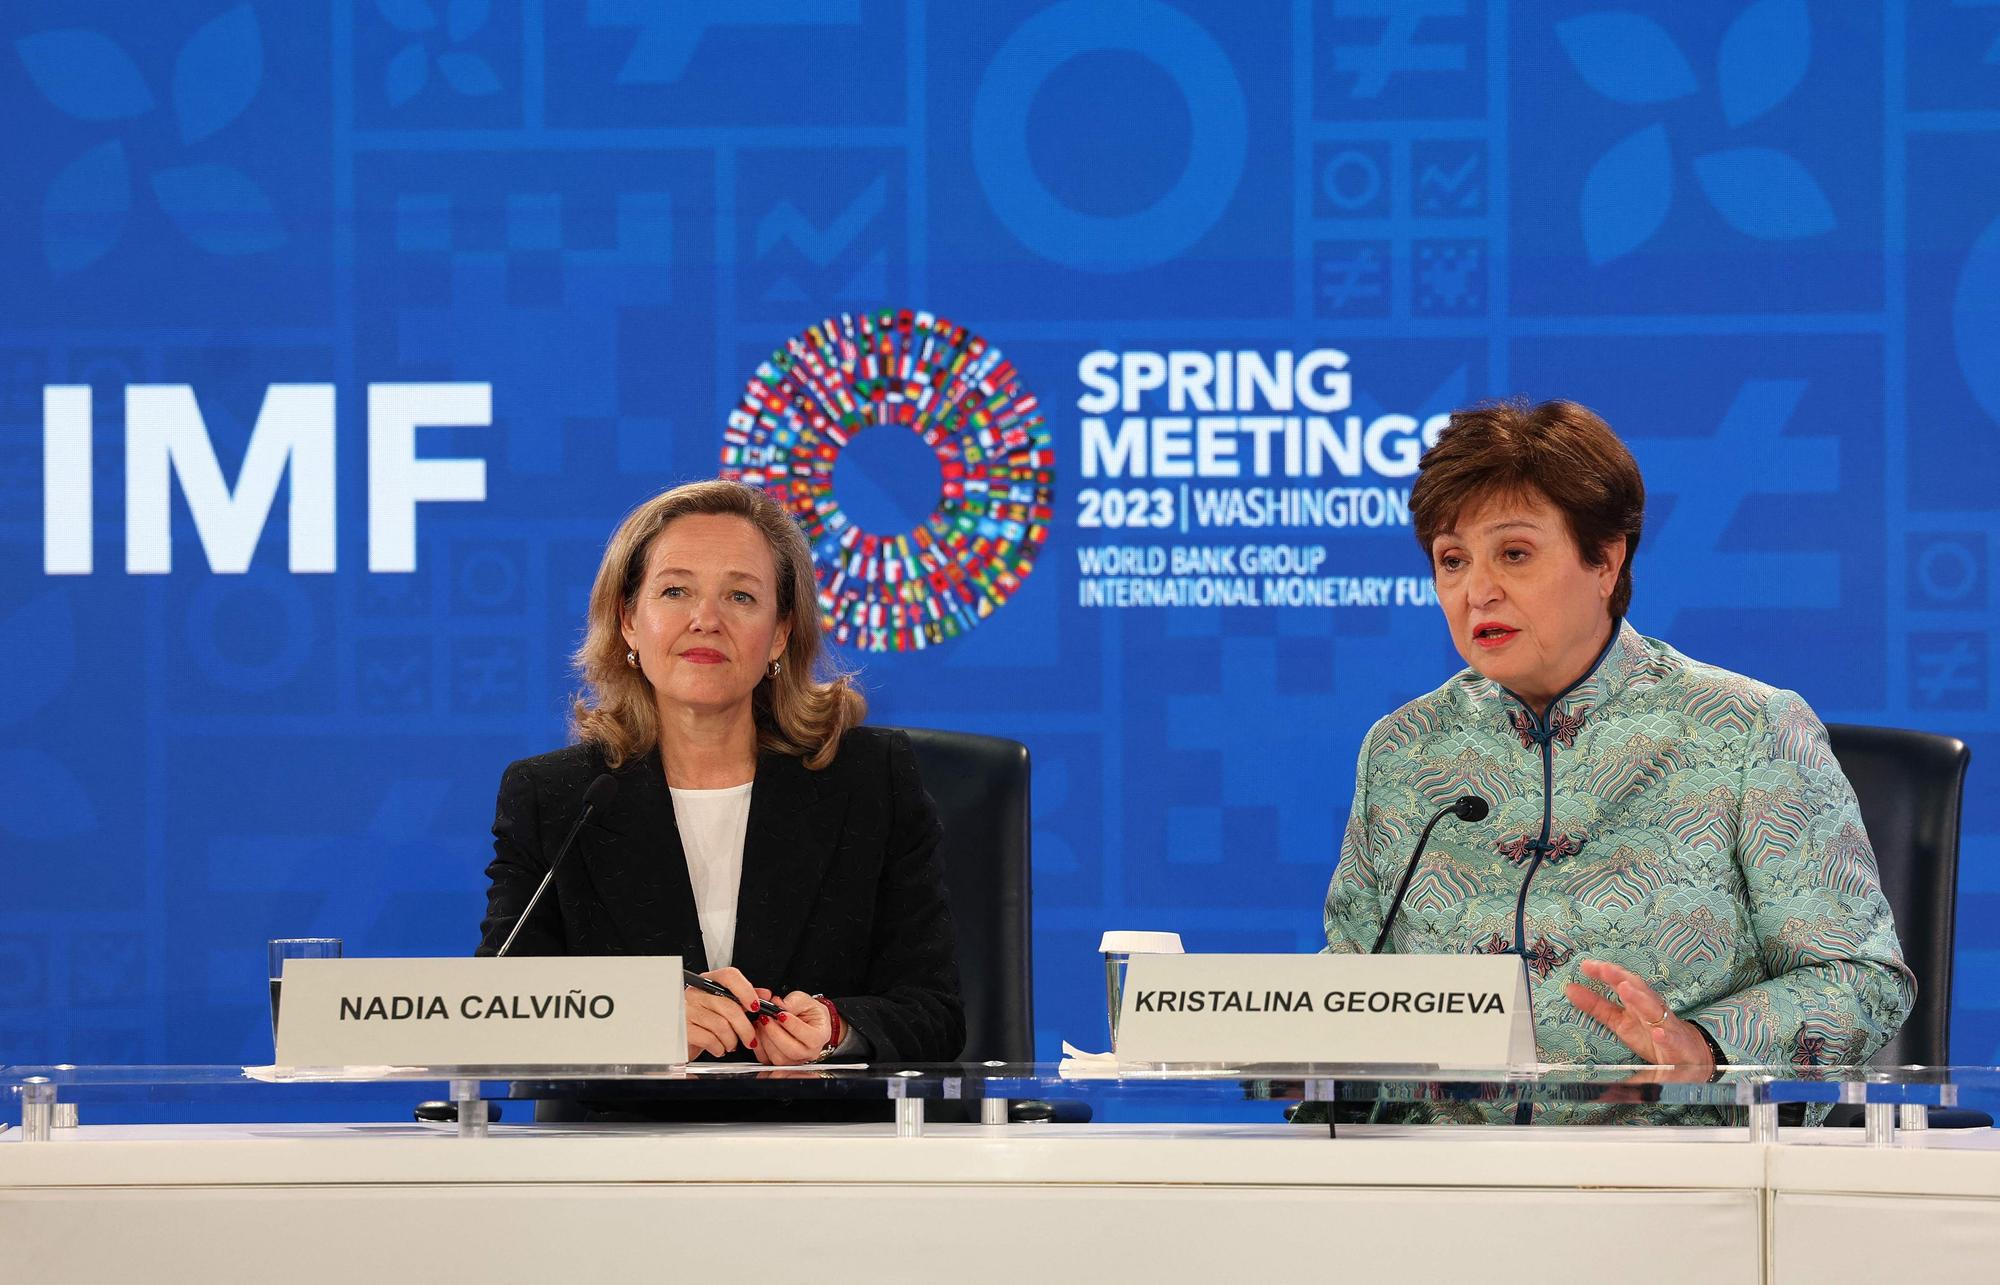 US-IMF-AND-WORLD-BANK-GROUP-HOLD-SPRING-MEETINGS-IN-WASHINGTON,